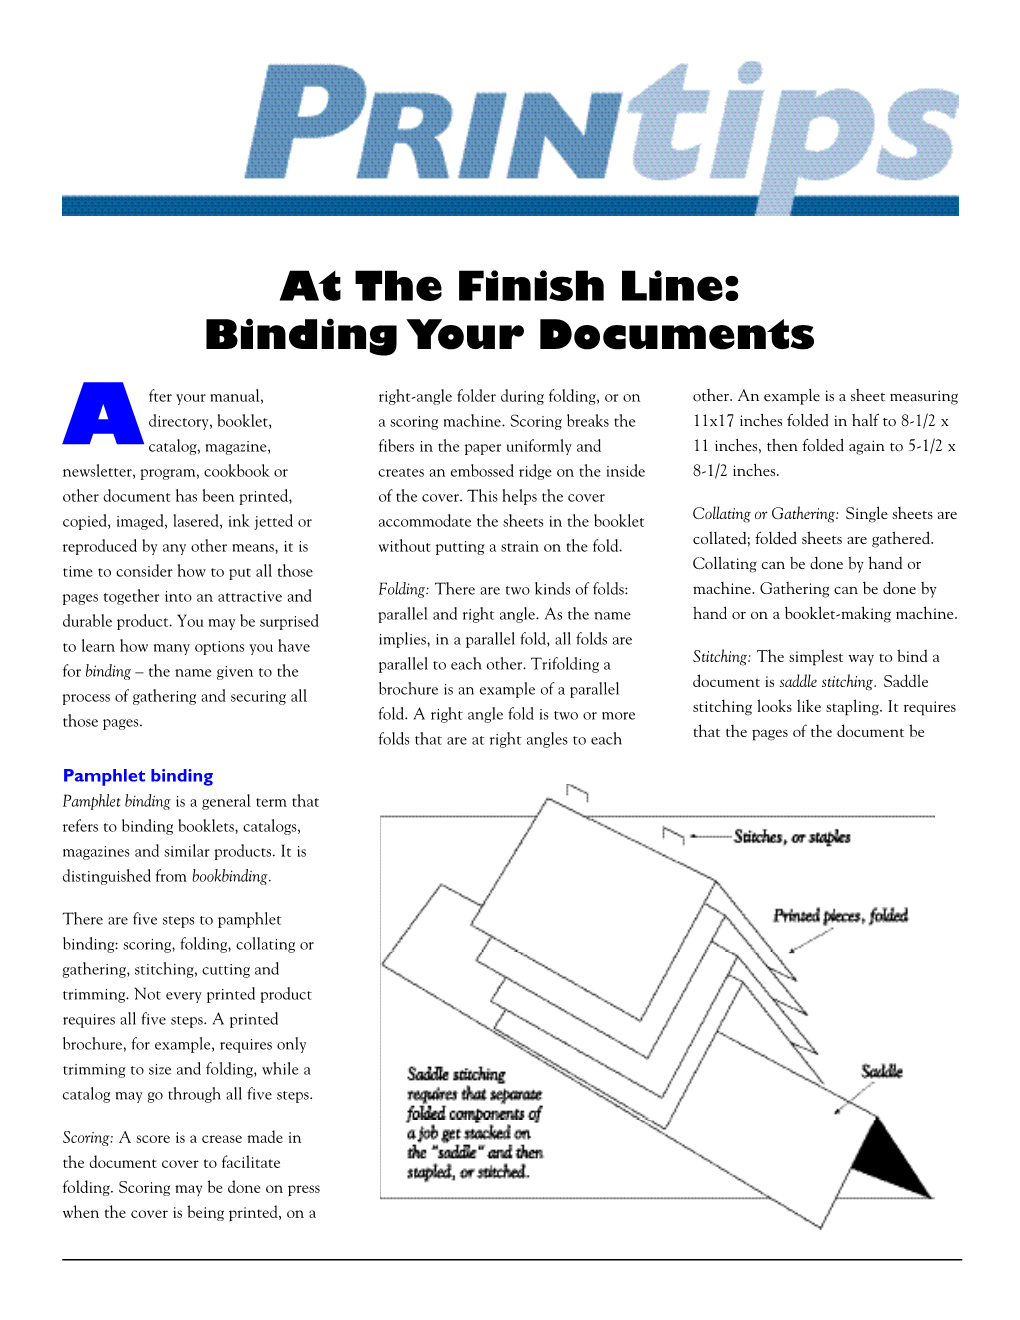 At the Finish Line: Binding Your Documents